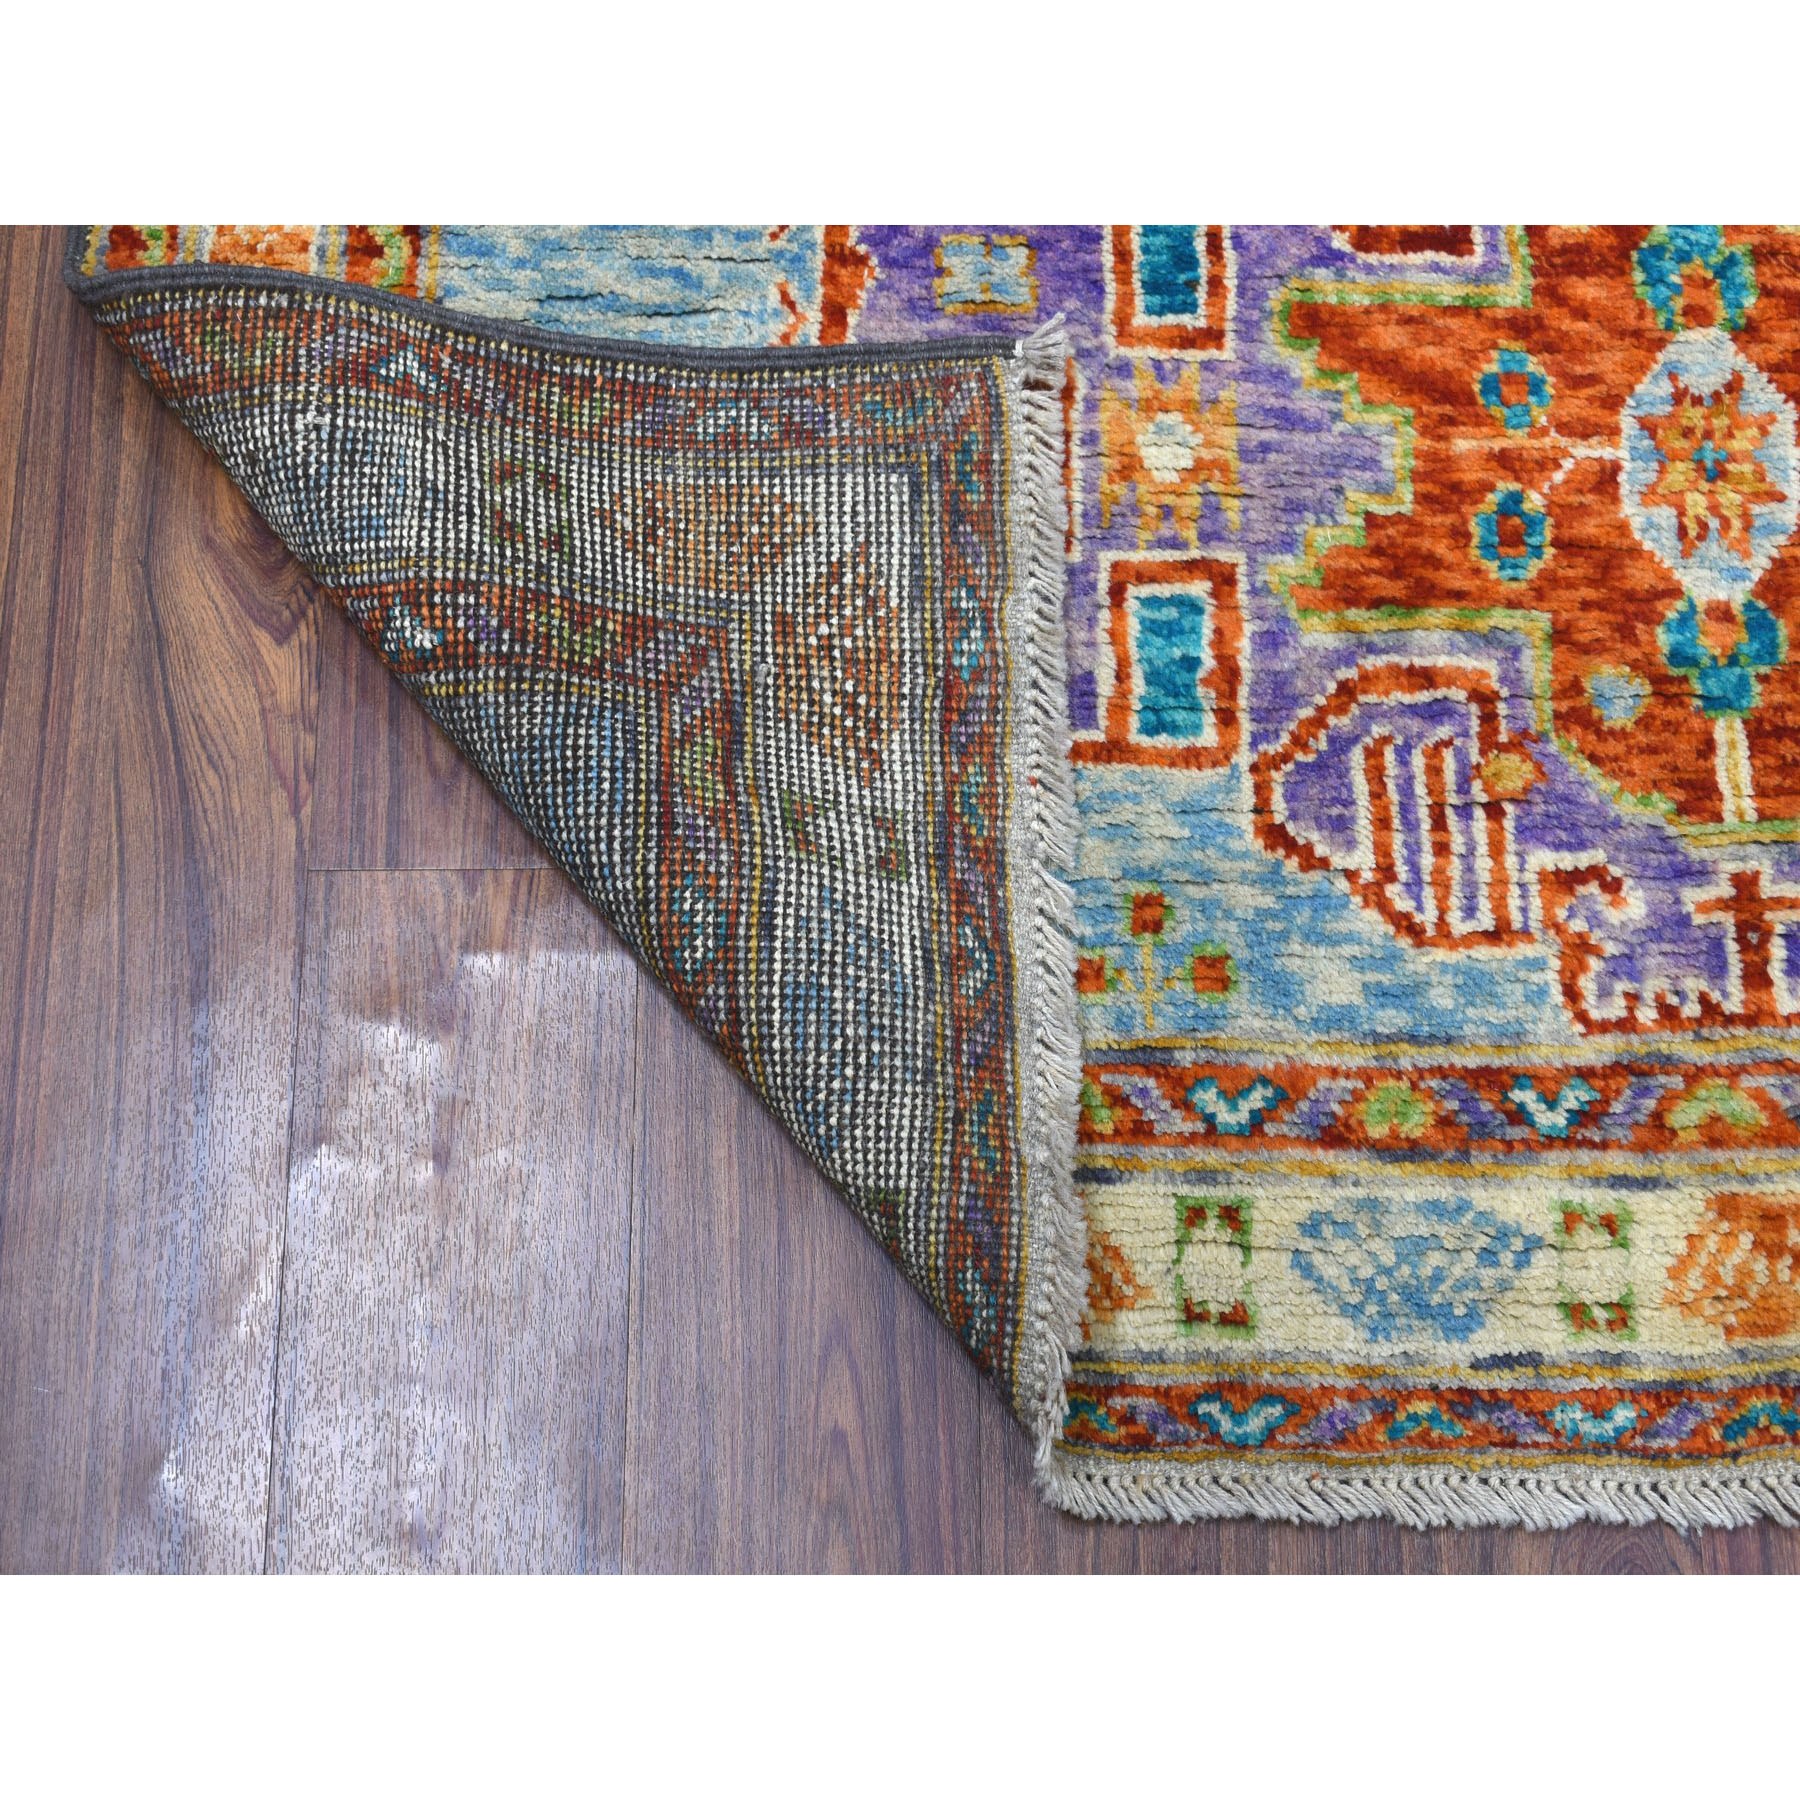 5-1 x6-5  Natural Dyes Colorful Afghan Baluch Geometric Design Hand Knotted 100% Wool Oriental Rug 